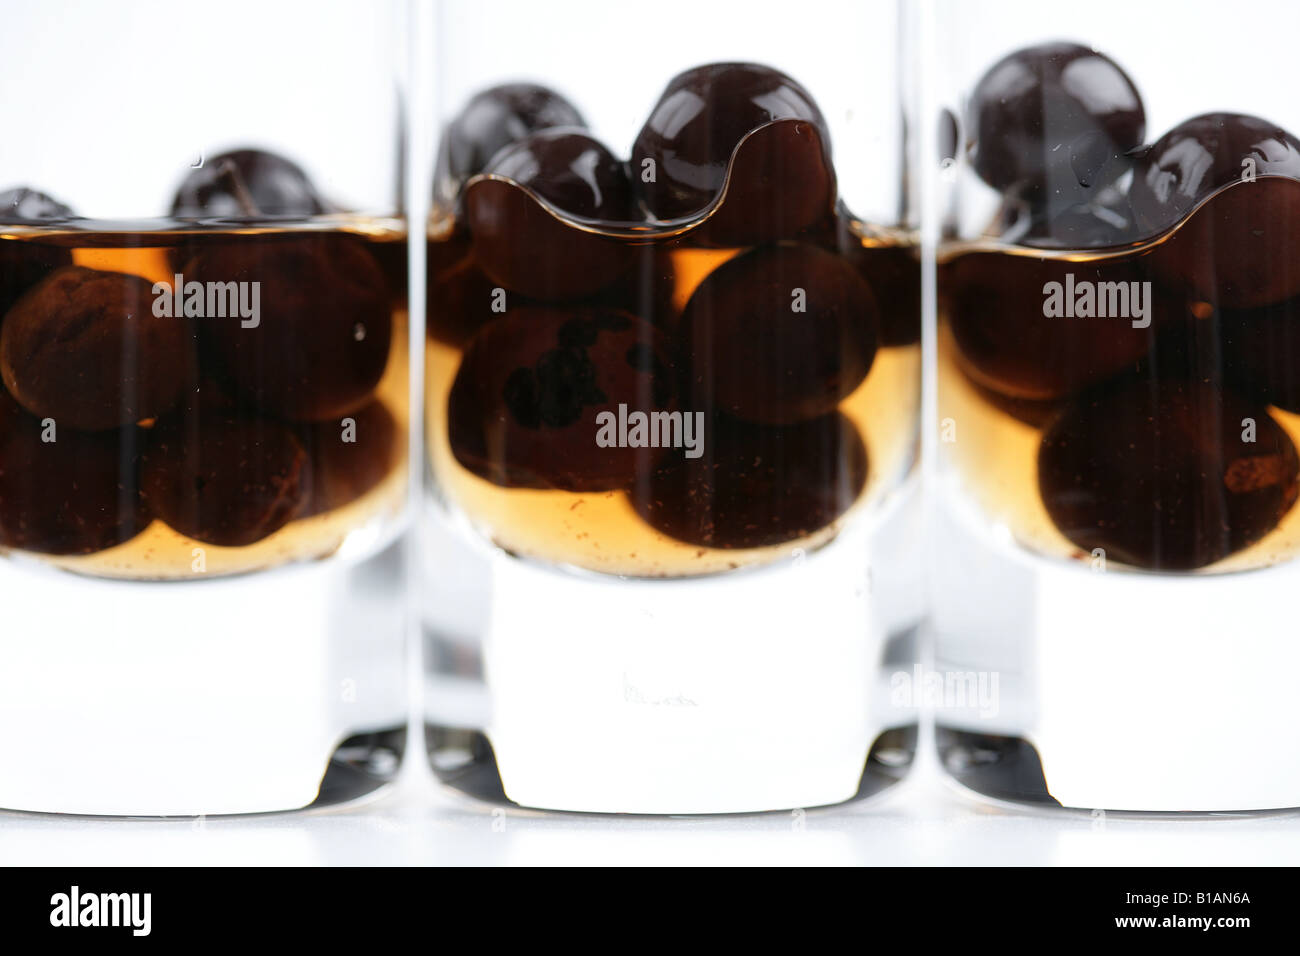 Sloe berries in small glasses with sloe gin Stock Photo